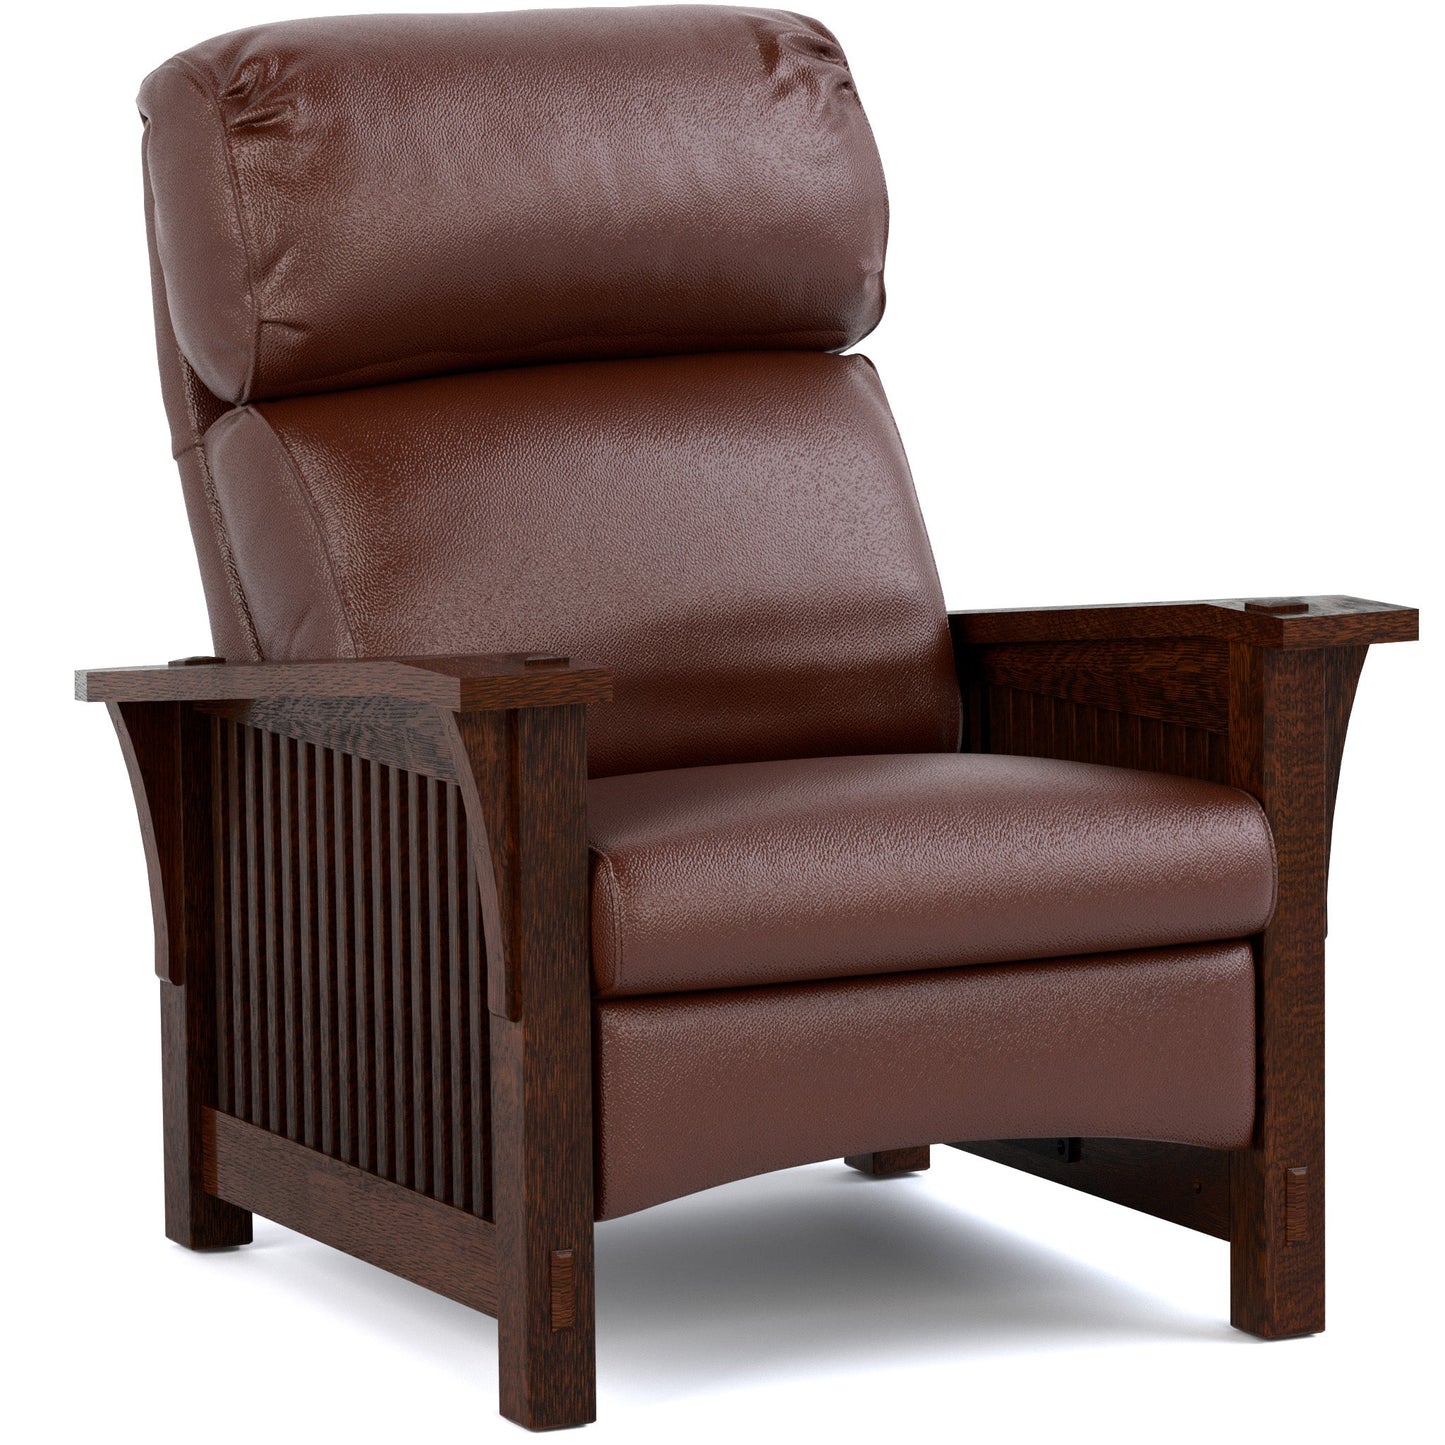 Bustle Back Spindle Morris Recliner Colman Sienna Leather 031 - Centennial Finish